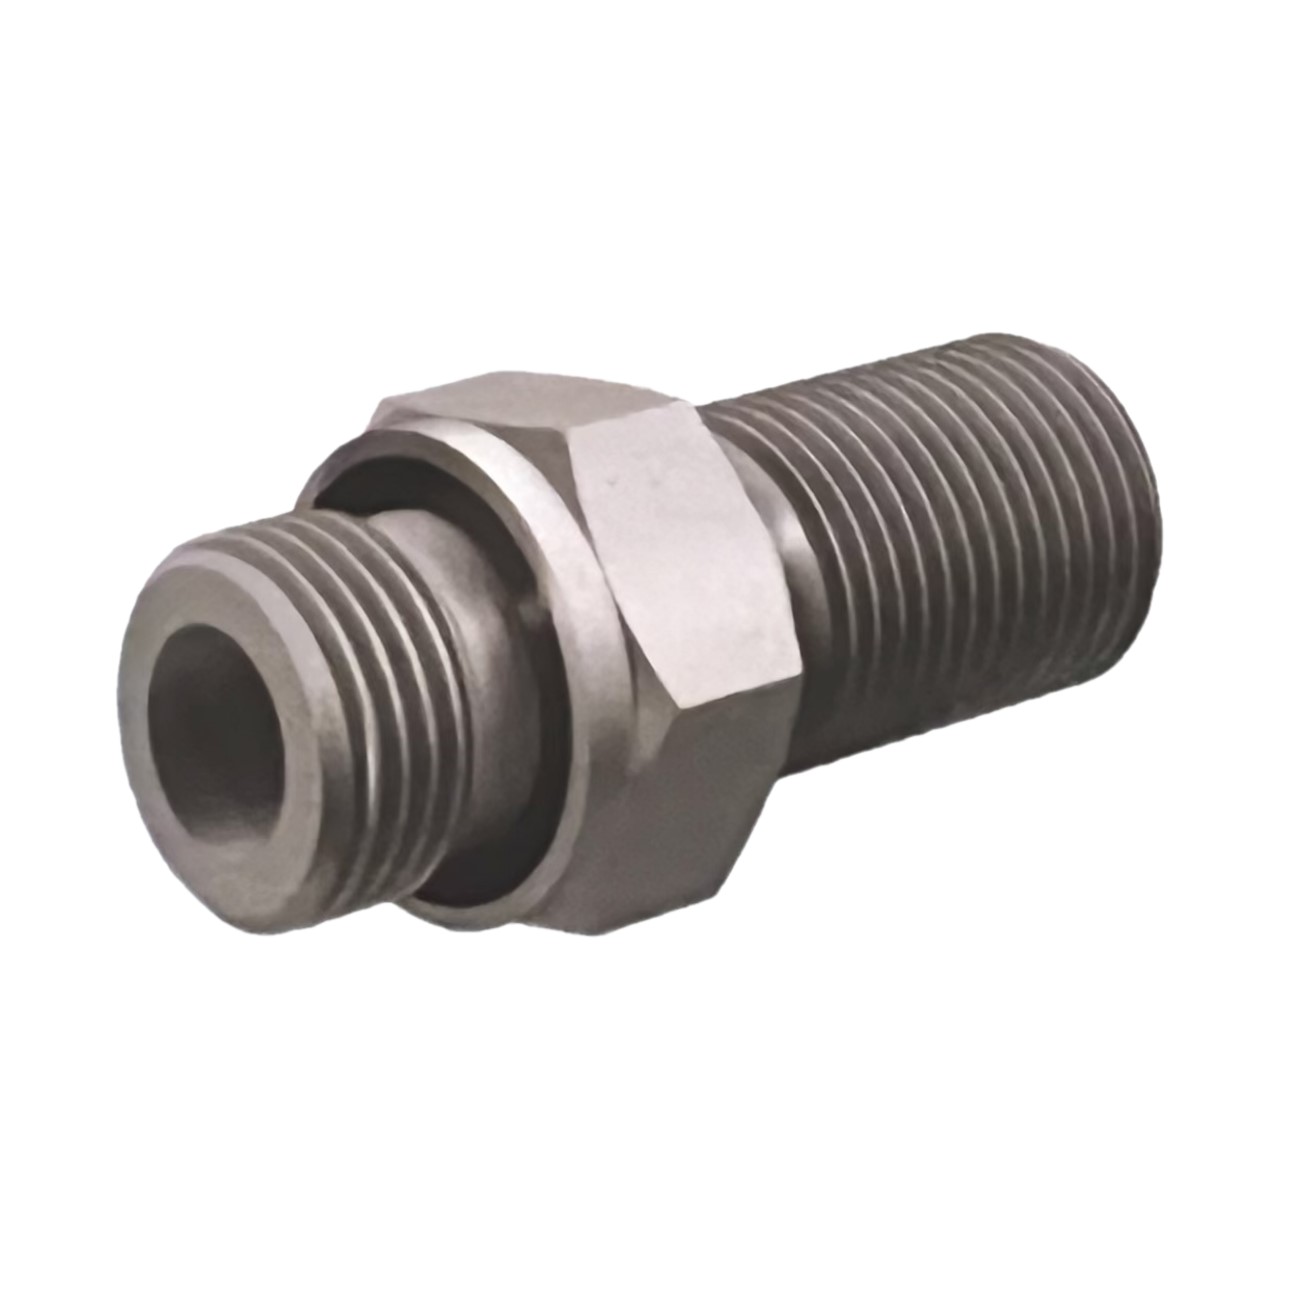 BSP MALE CAPTIVE SEAL FOR 3869 X BSP MALE BULKHEAD ONLY COMPLETE WITH SEAL, 1/4" BSP (CS) X 1/4" BSP